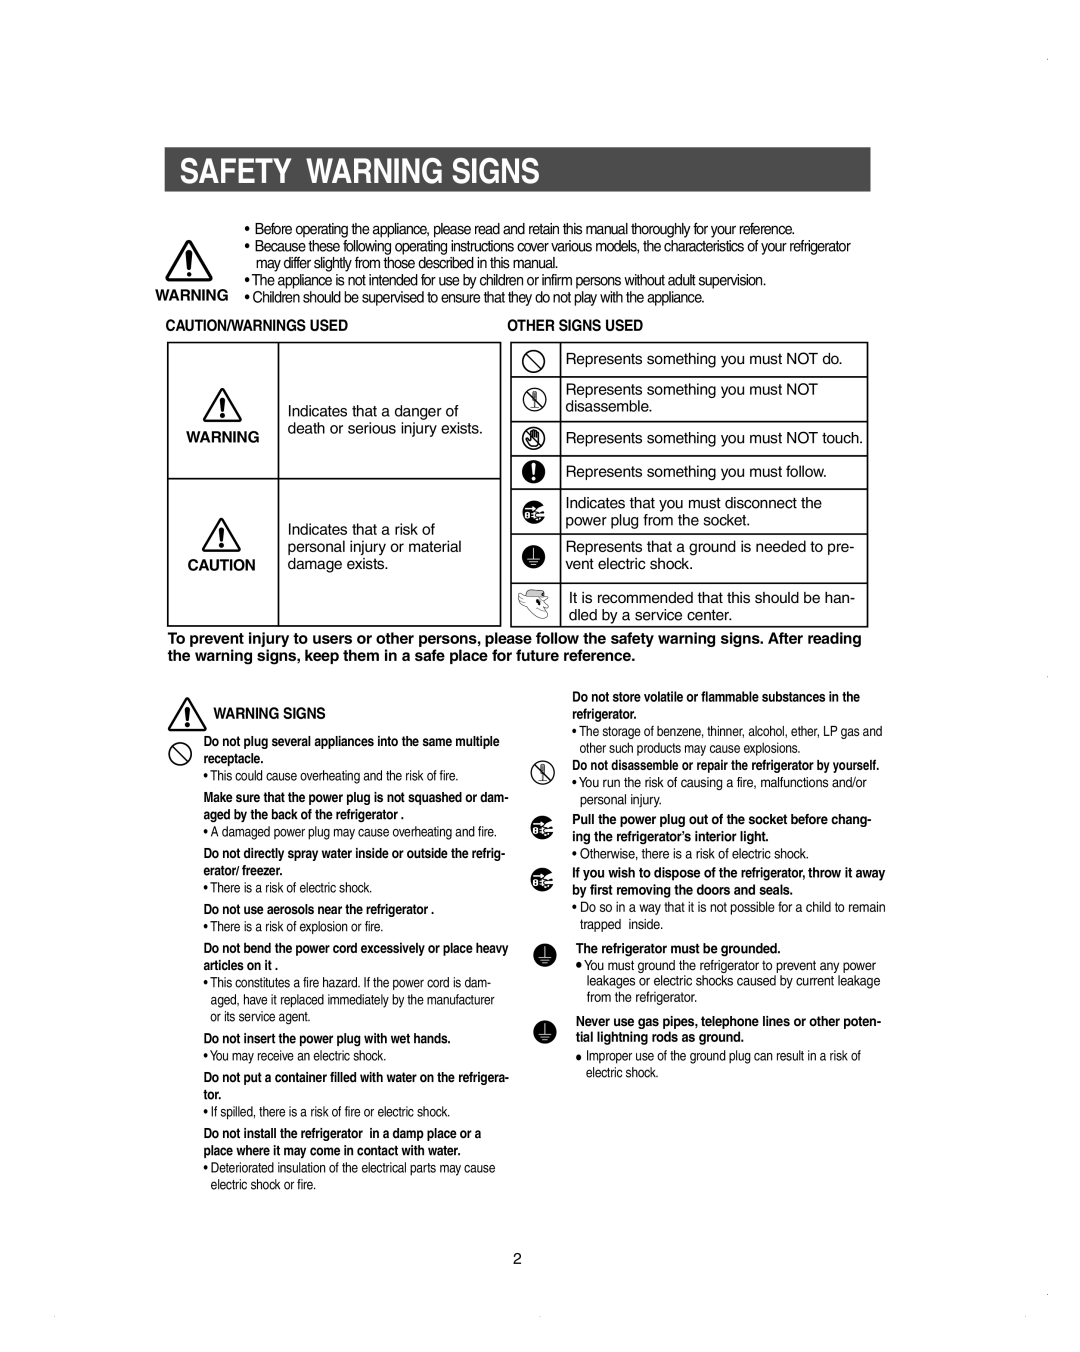 Samsung DA99-01278C owner manual Safety Warning Signs, Caution/Warnings Used, Other Signs Used 